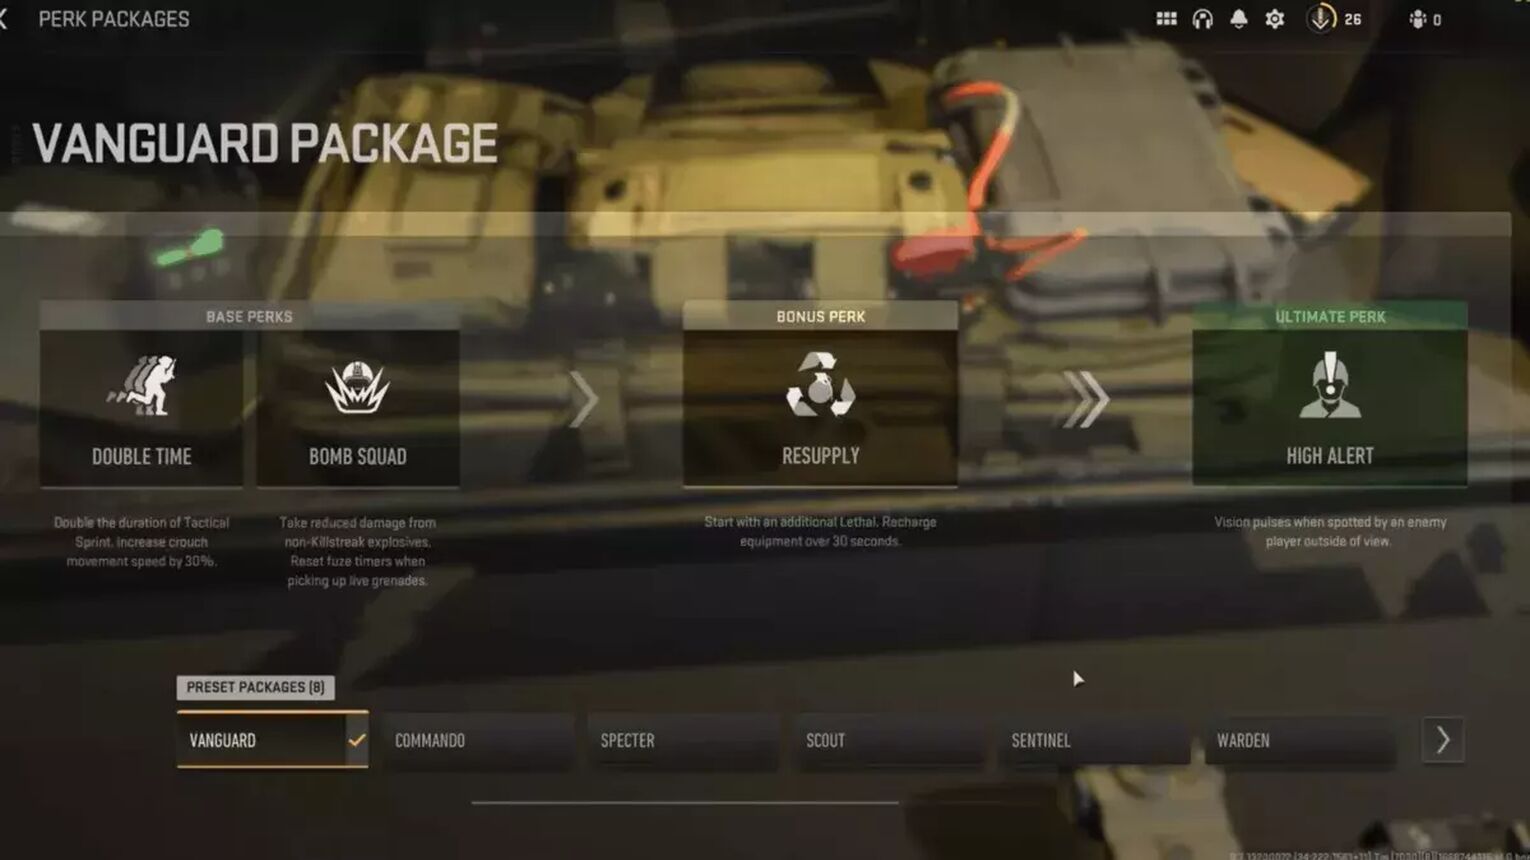 What Are The Perk Packages In Warzone 2